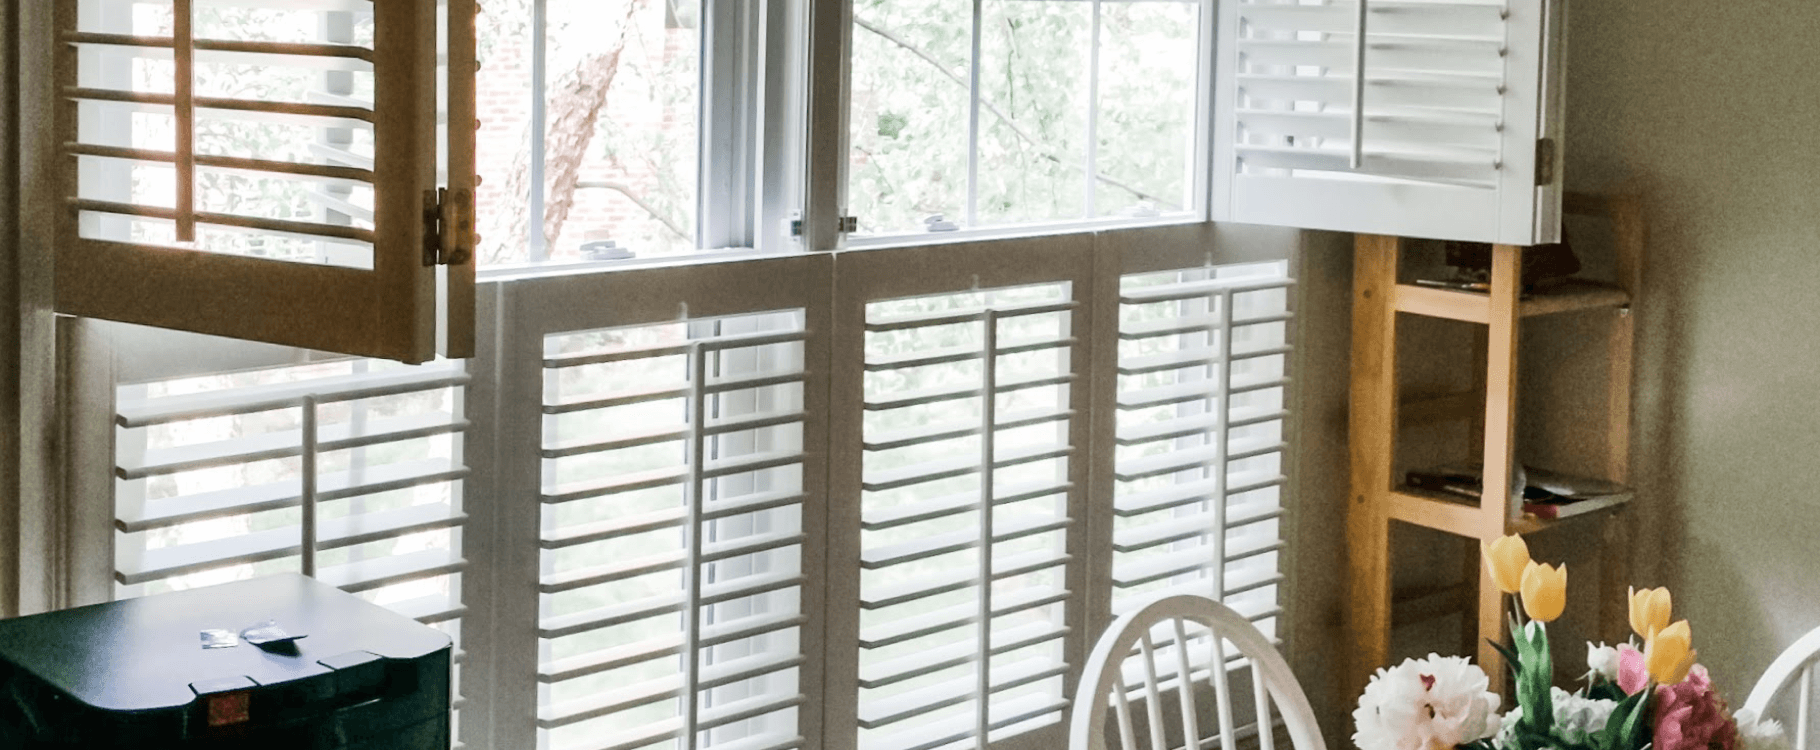 7 Benefits of Using Plantation Shutters in your Home?